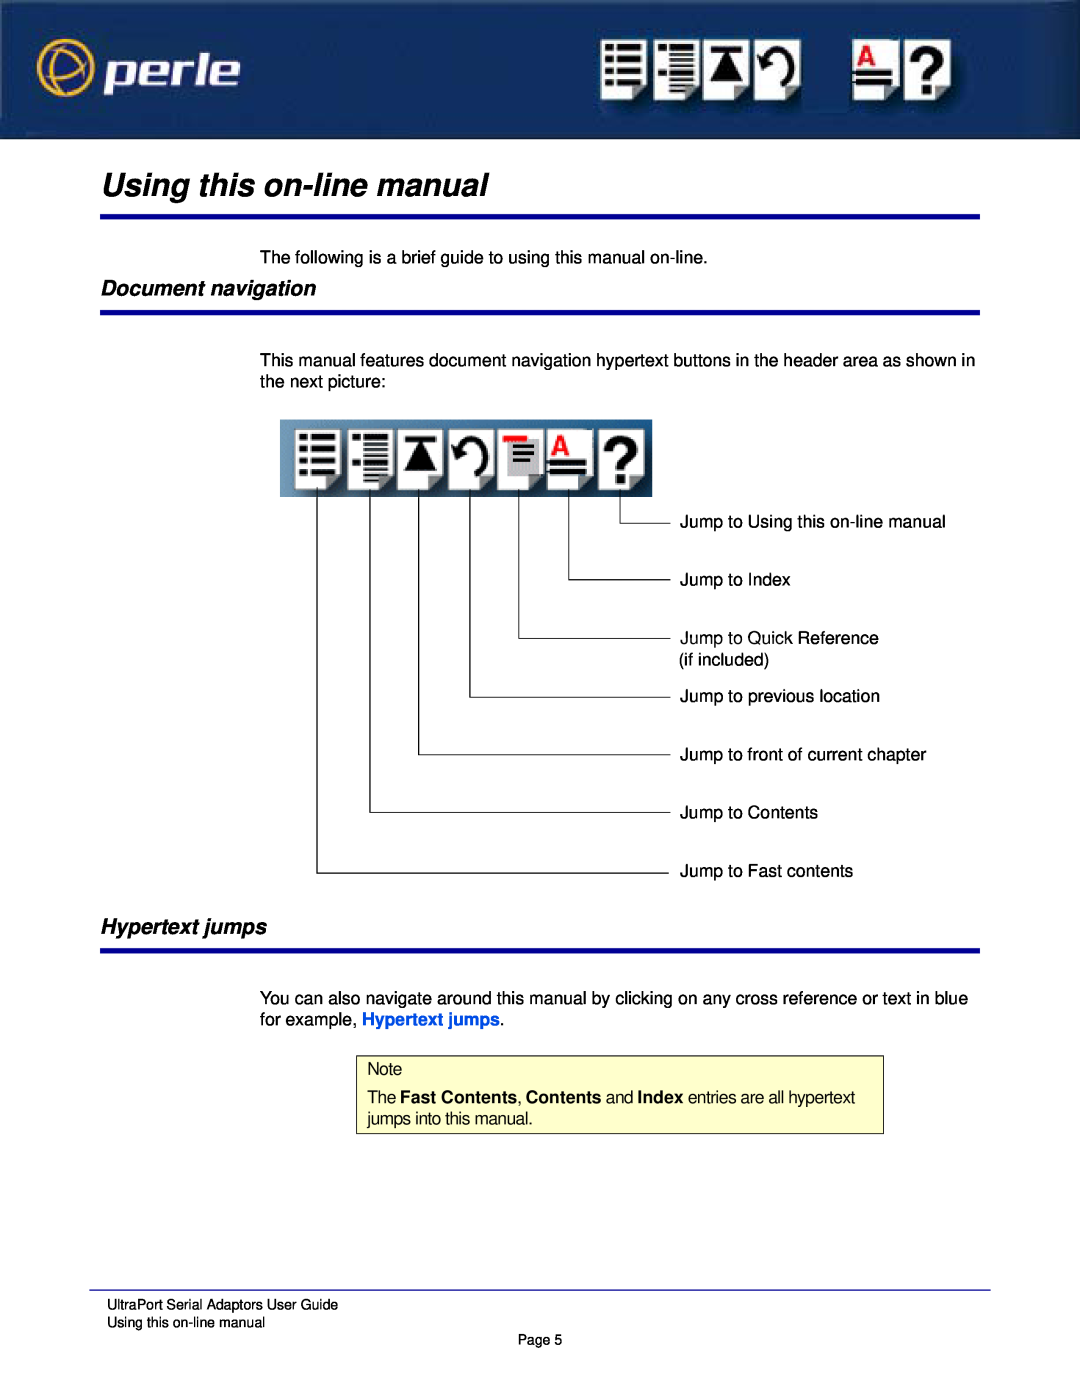 Perle Systems 5500152-23 Using this on-line manual, Document navigation, Hypertext jumps 